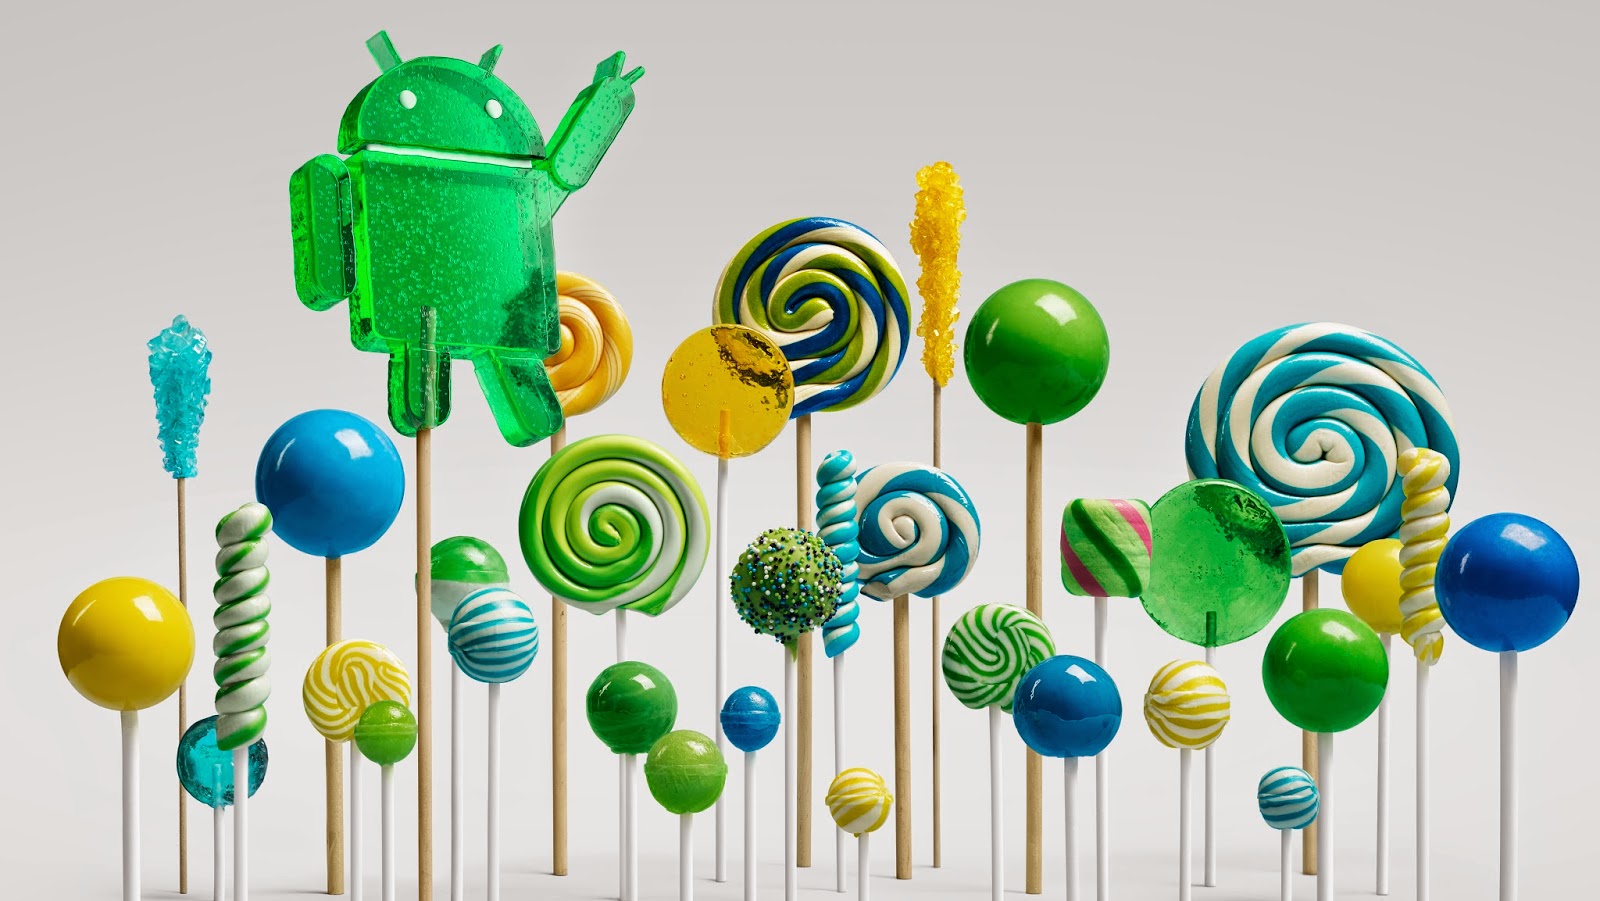 Android 5.0: Android Lollipop